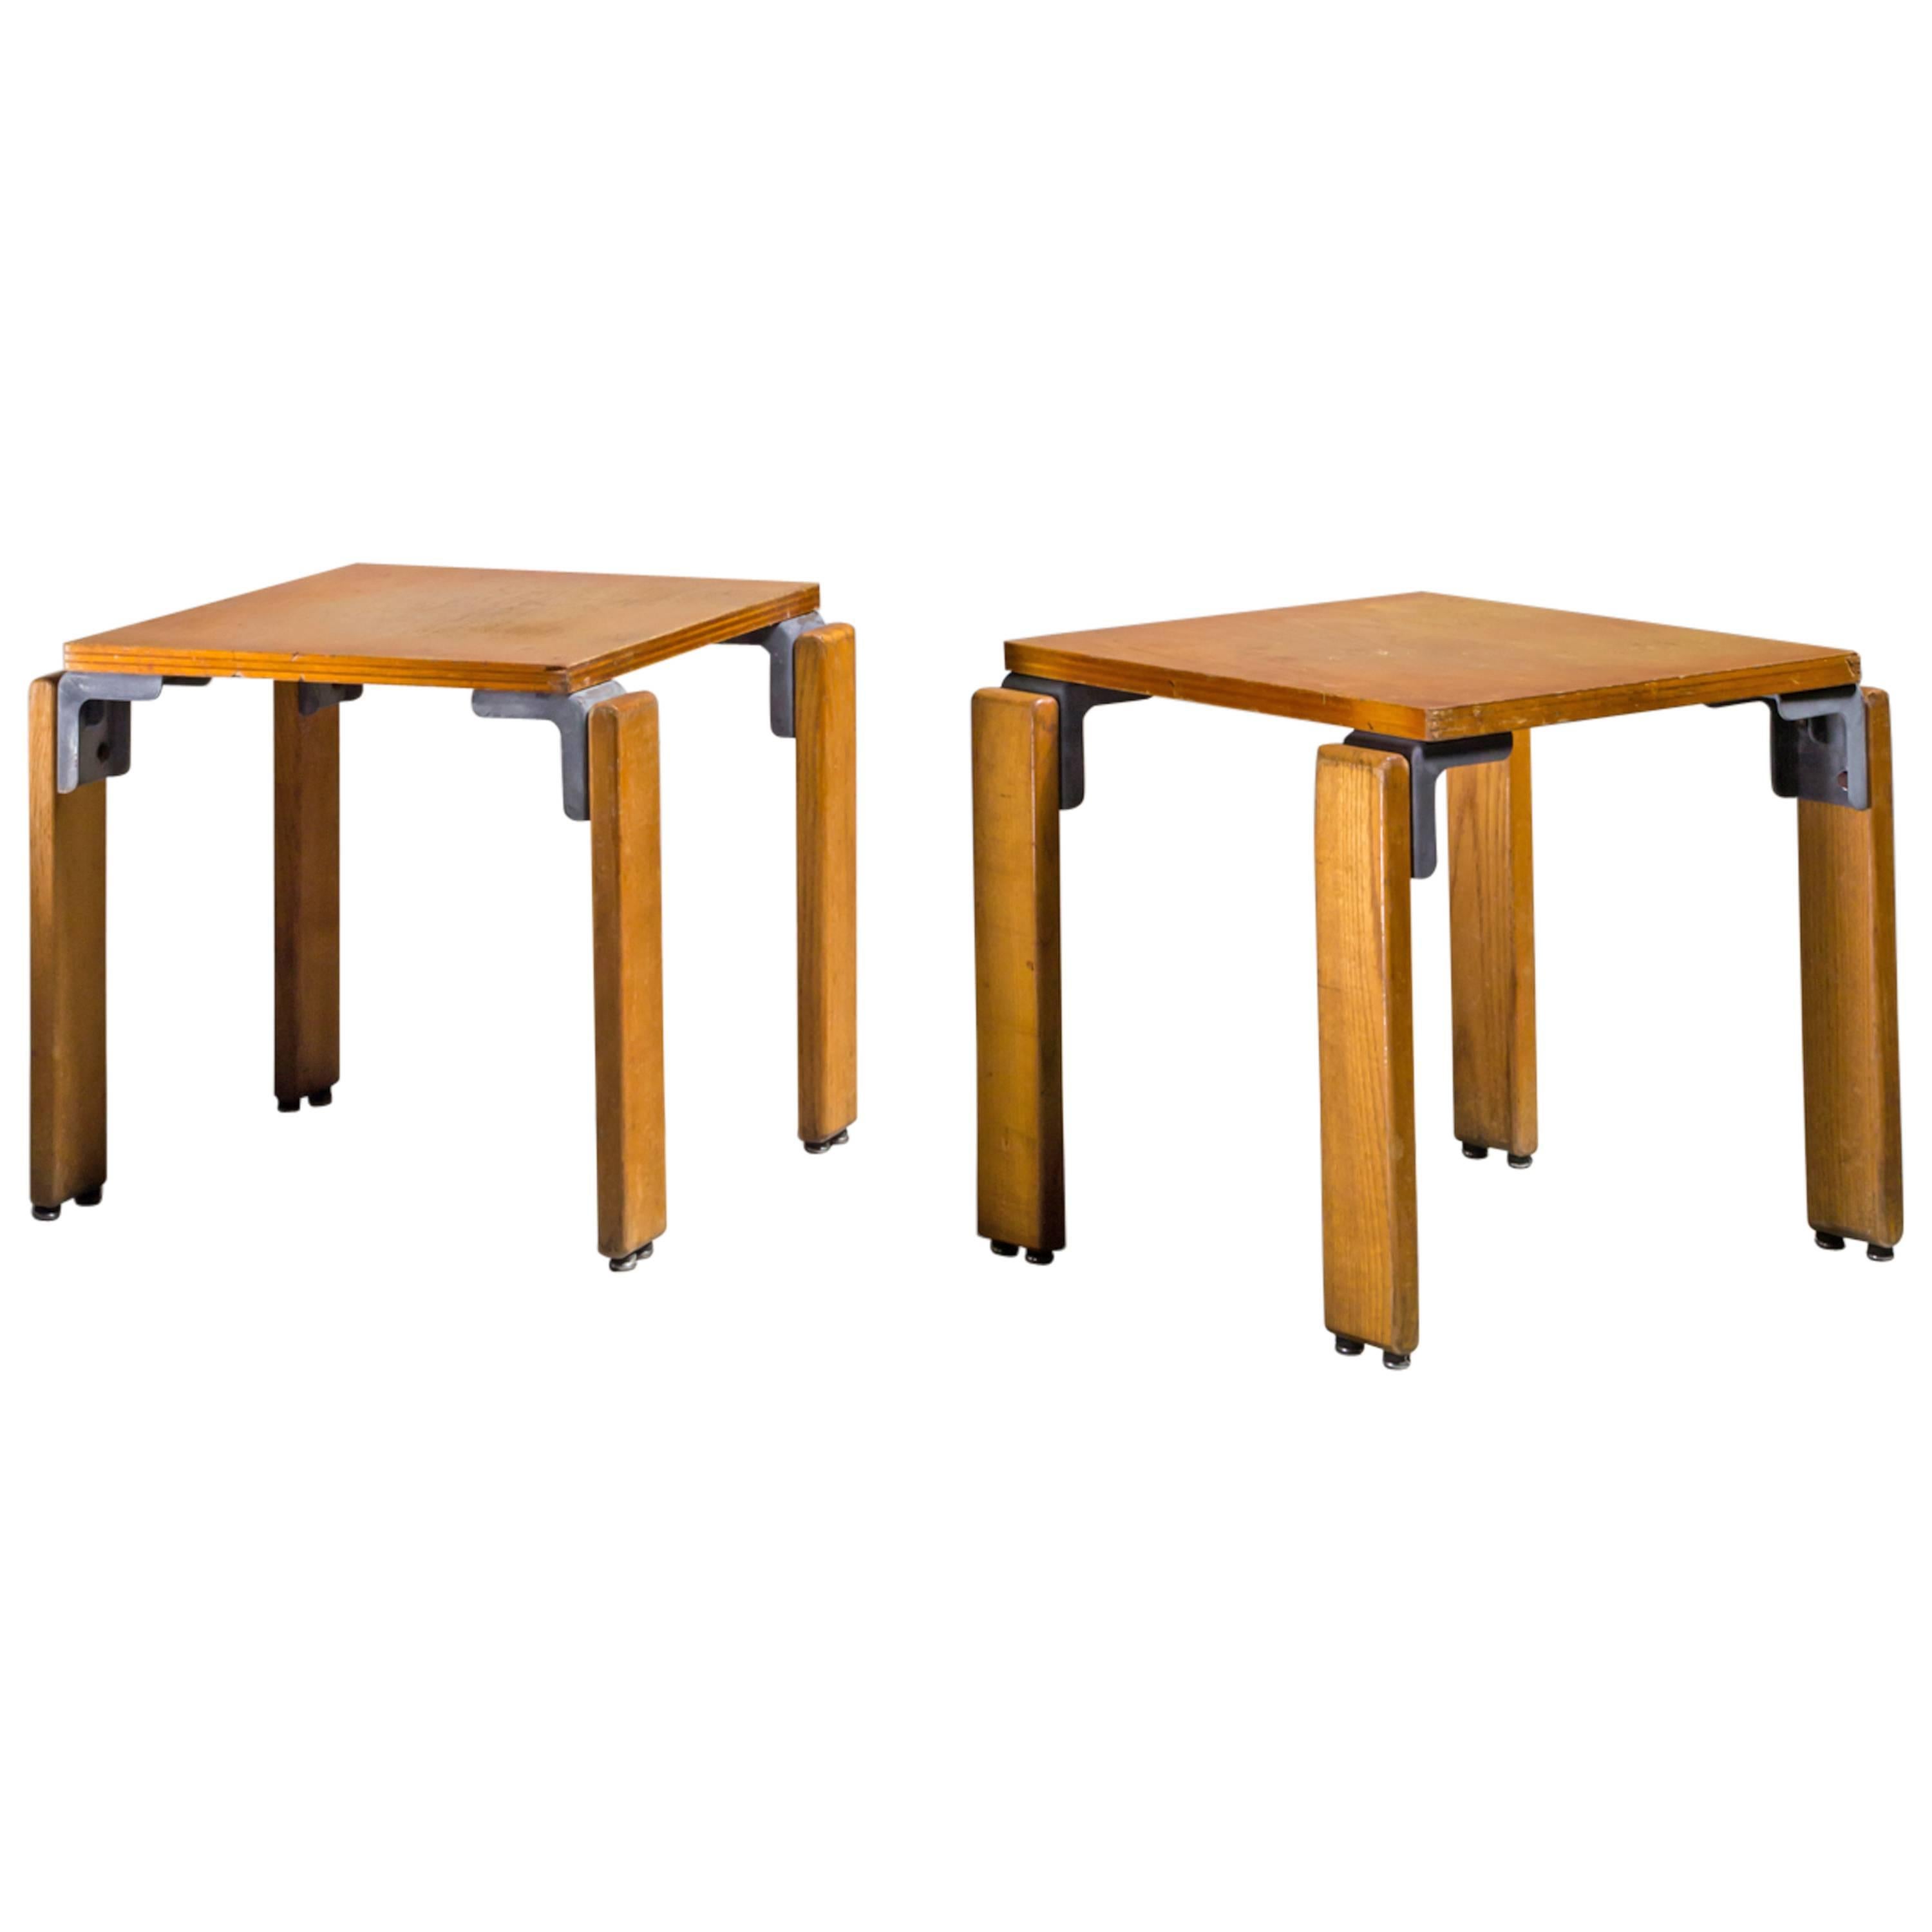 Georges Candilis & Anja Blomstedt Pair of Stools or Side Tables, France, 1968 For Sale